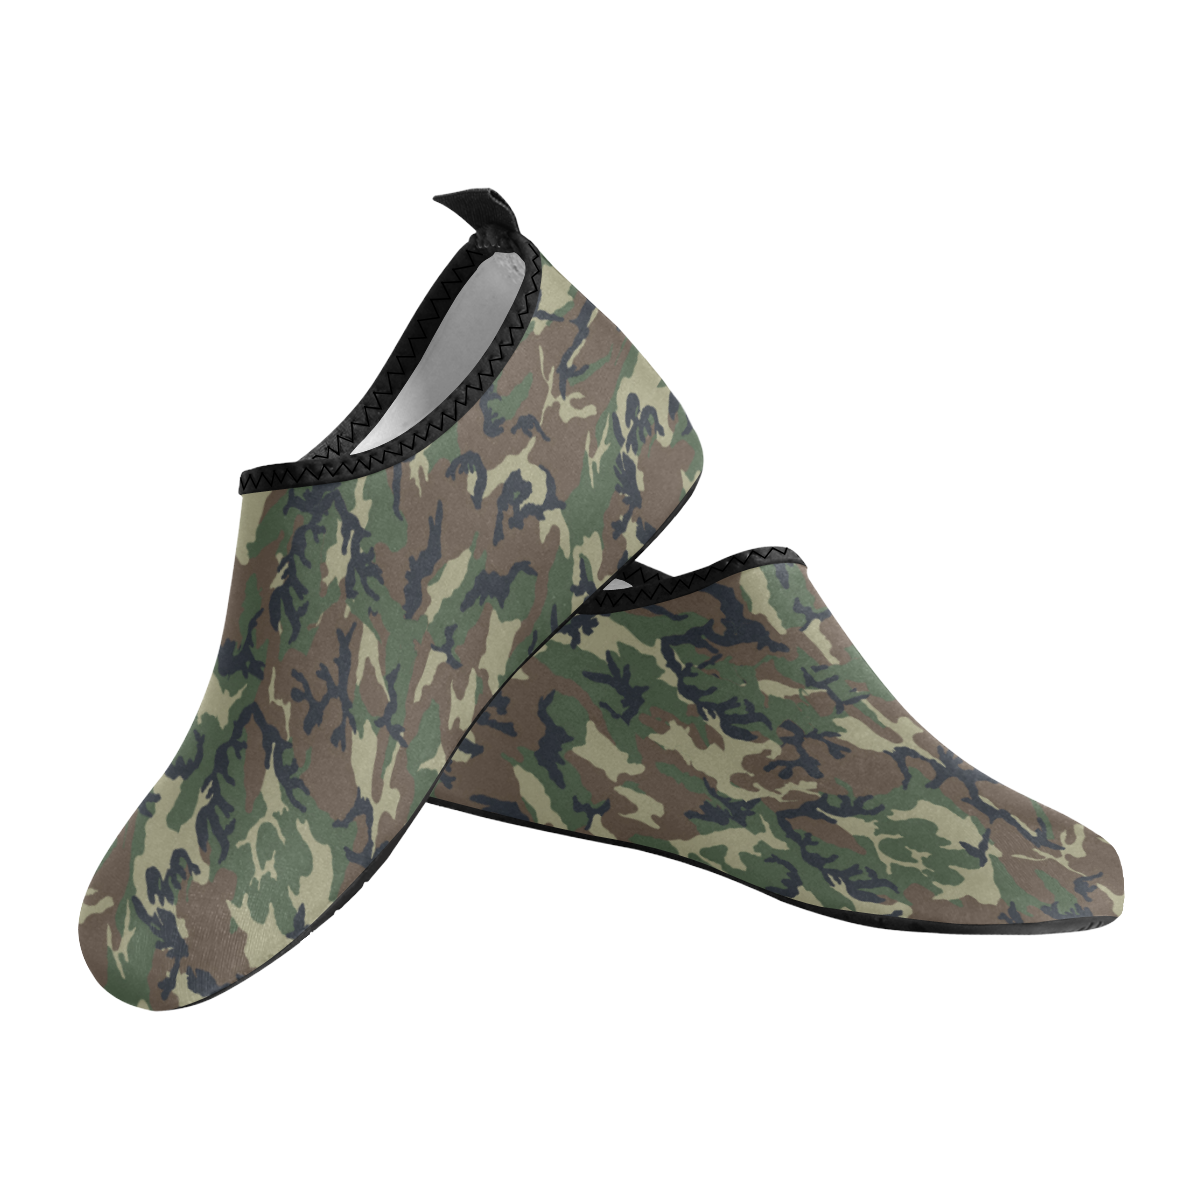 Woodland Forest Green Camouflage Men's Slip-On Water Shoes (Model 056)